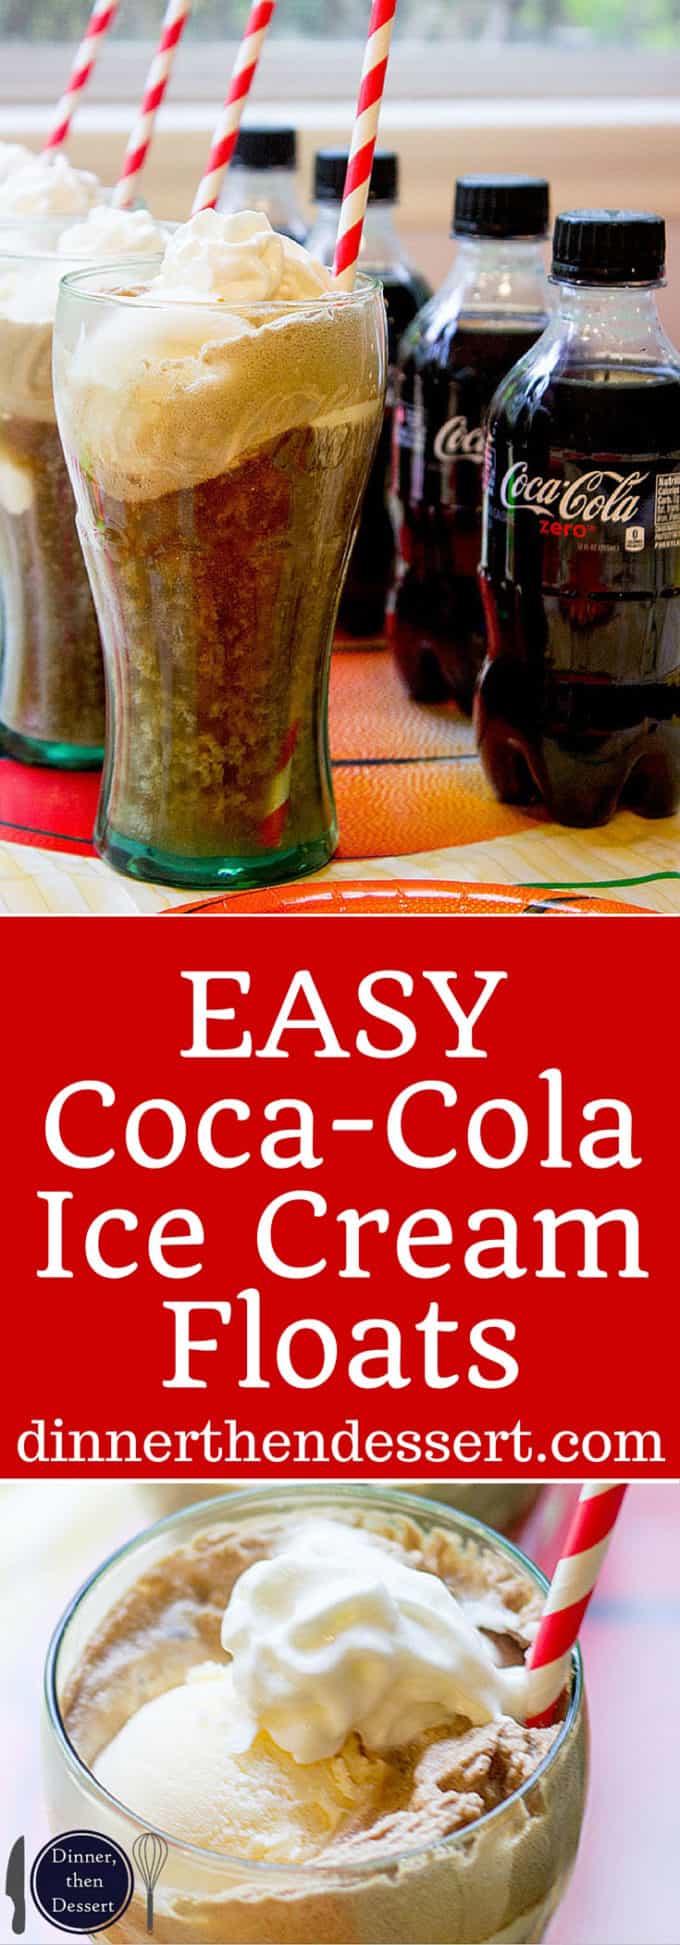 Delicious, EASY Coca-Cola Ice Cream Floats are a nostalgic throwback to childhood! AD. #Greattastetourney